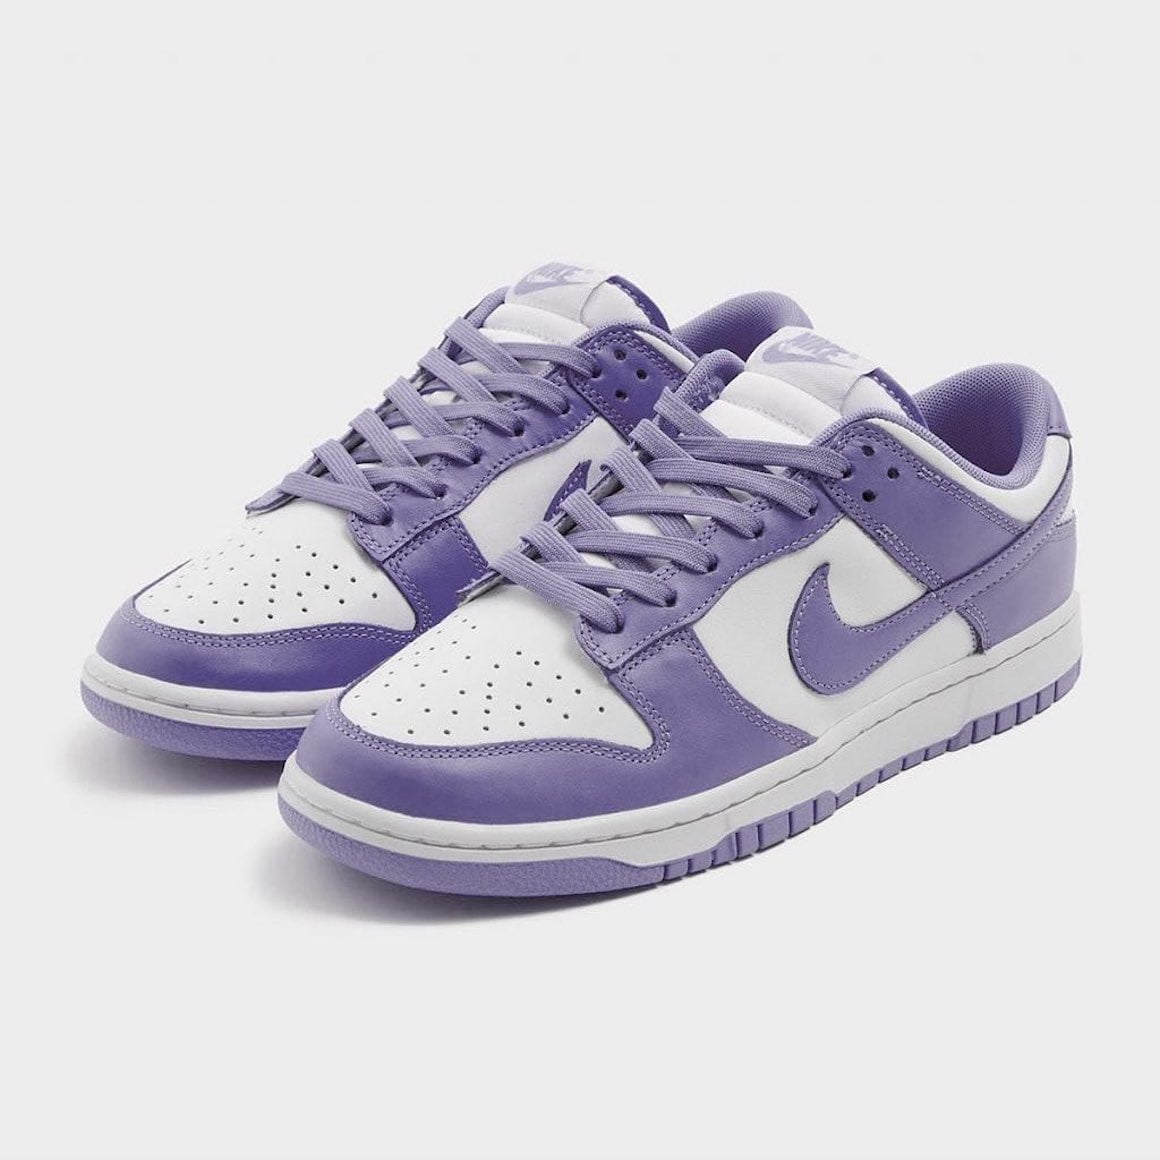 white and purple dunks